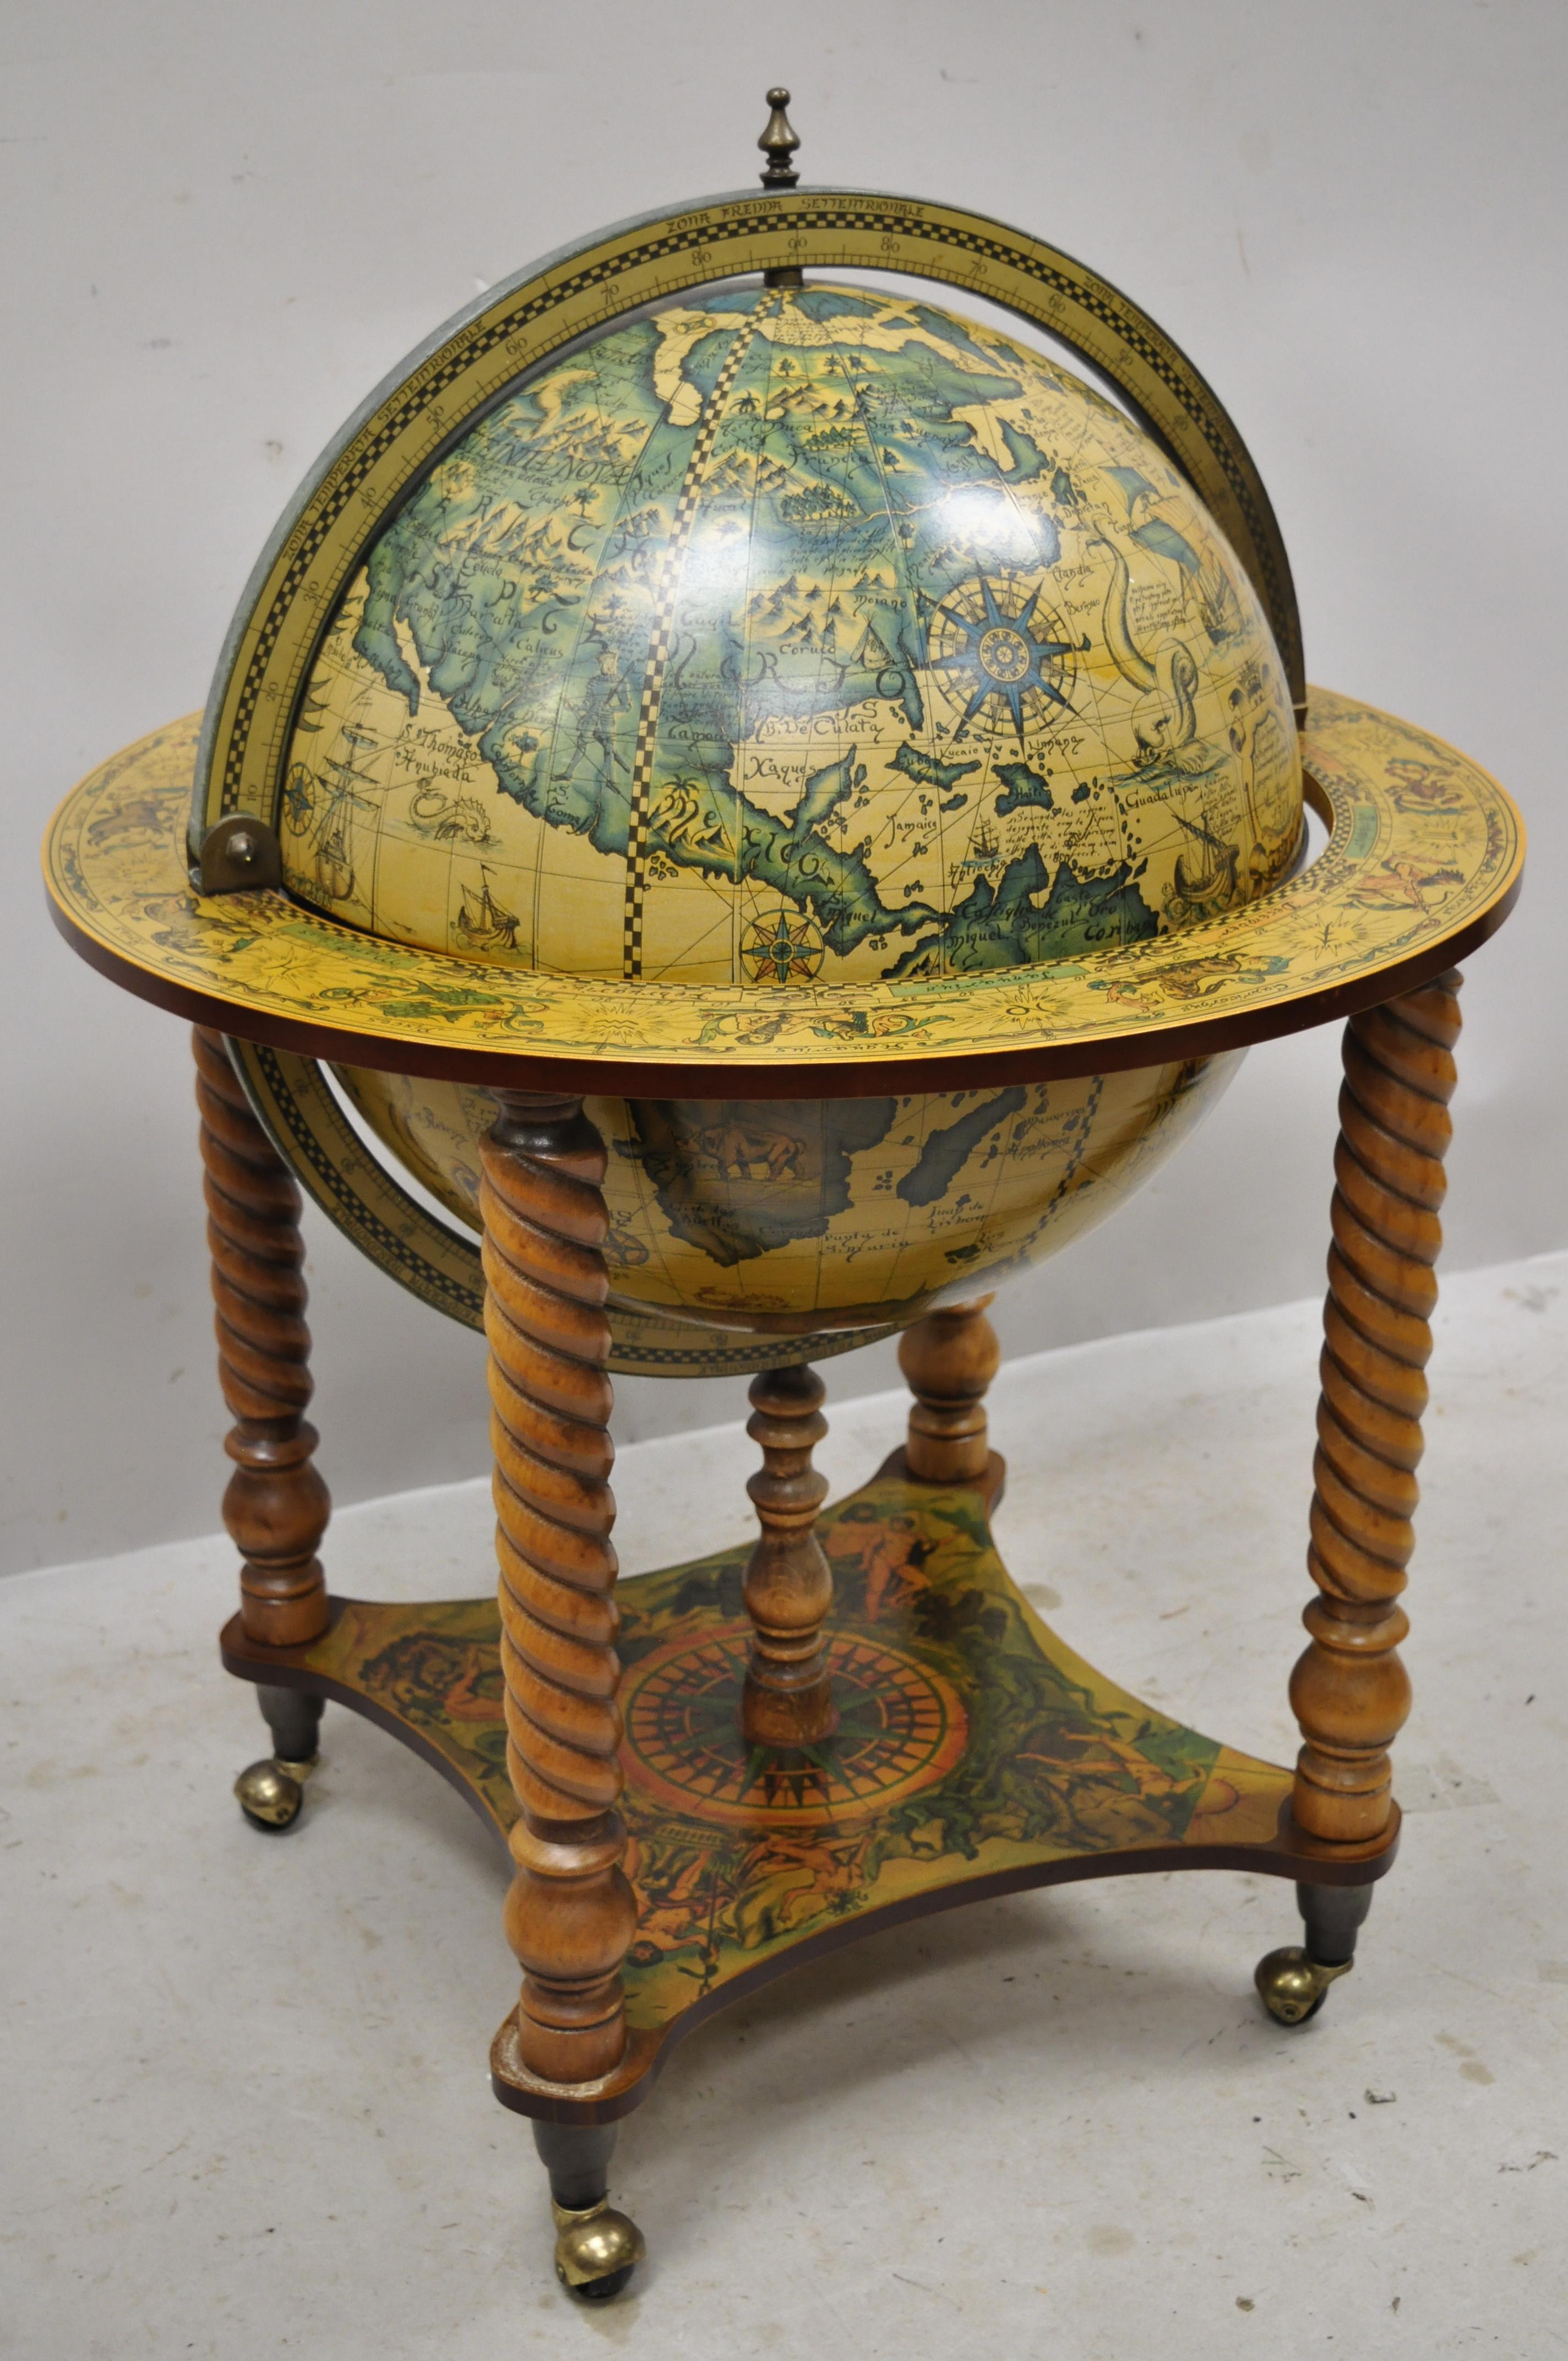 Late 20th century Italian Renaissance revolving large globe liquor bar cart. item features rolling casters, lift top, revolving globe, great style and form, circa late 20th-early 21st century. Measurements: 38